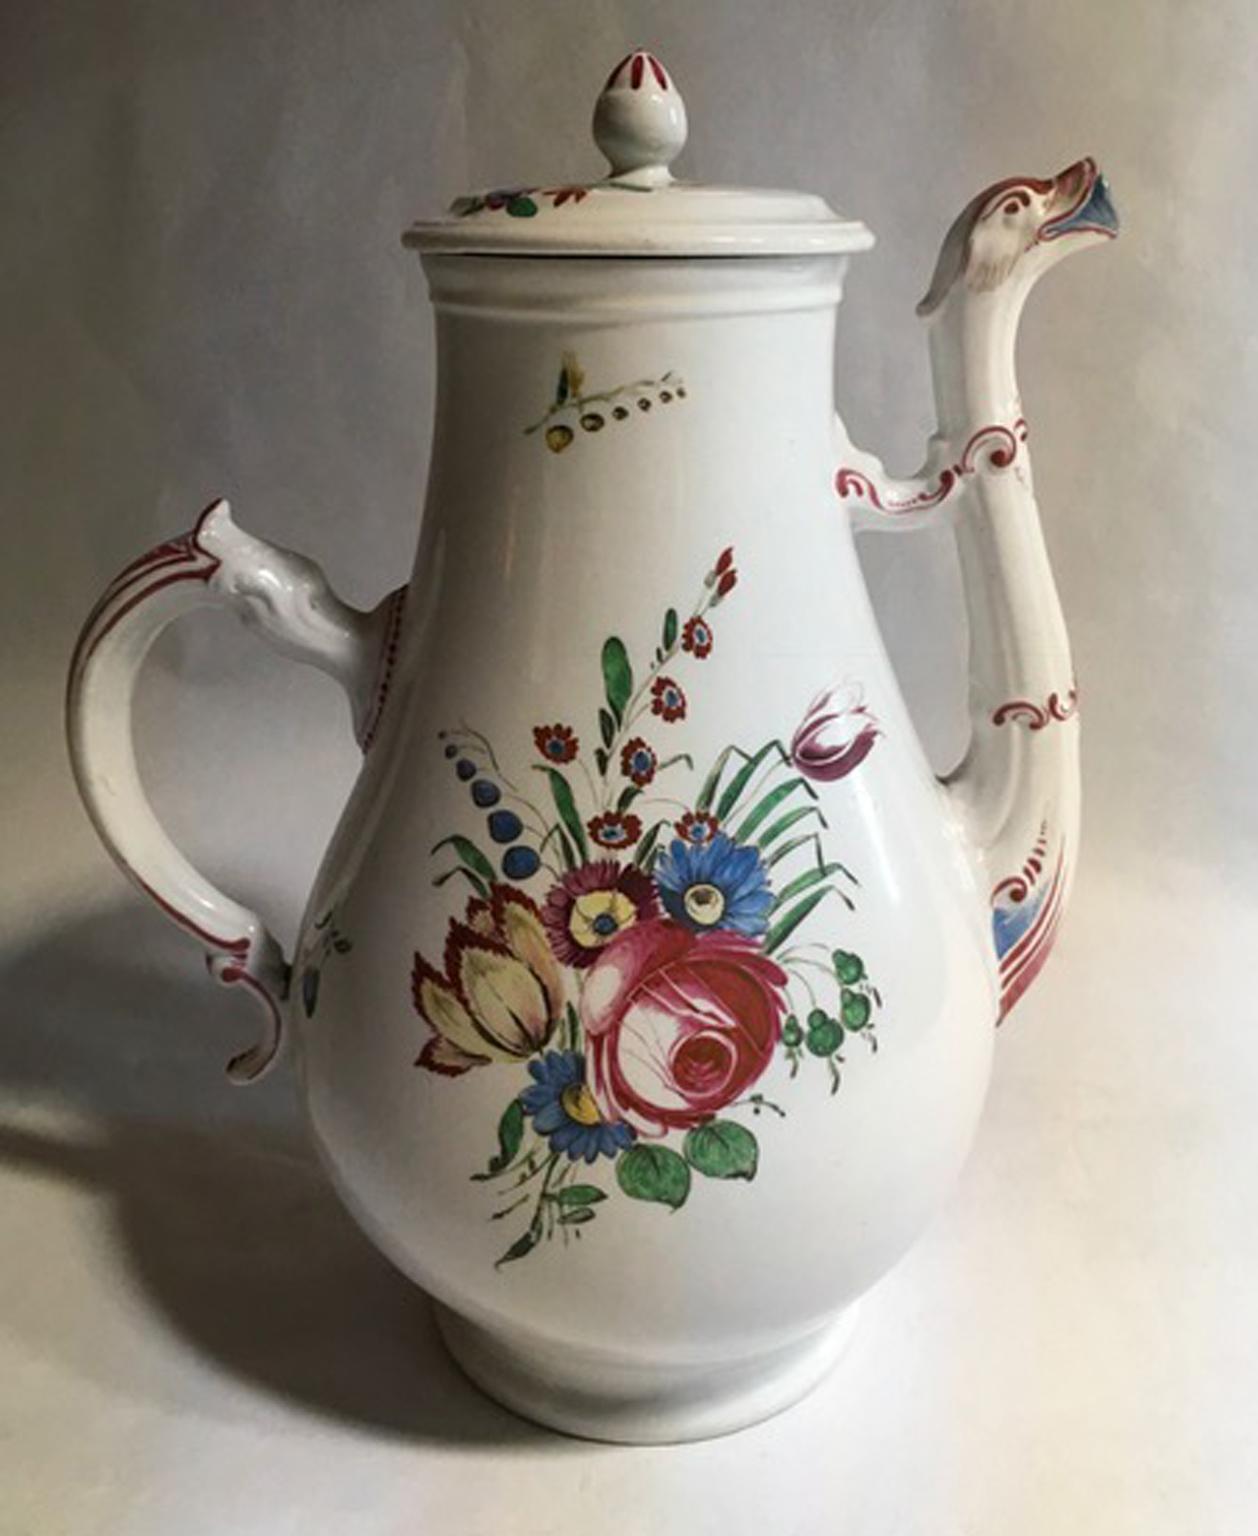 This is a beautiful piece in Italian porcelain handmade by Richard Ginori. The high quality of this italian production of Doccia, is recognizable at first glance. The flower decoration with pink roses, multicolored country flowers and tulips is hand